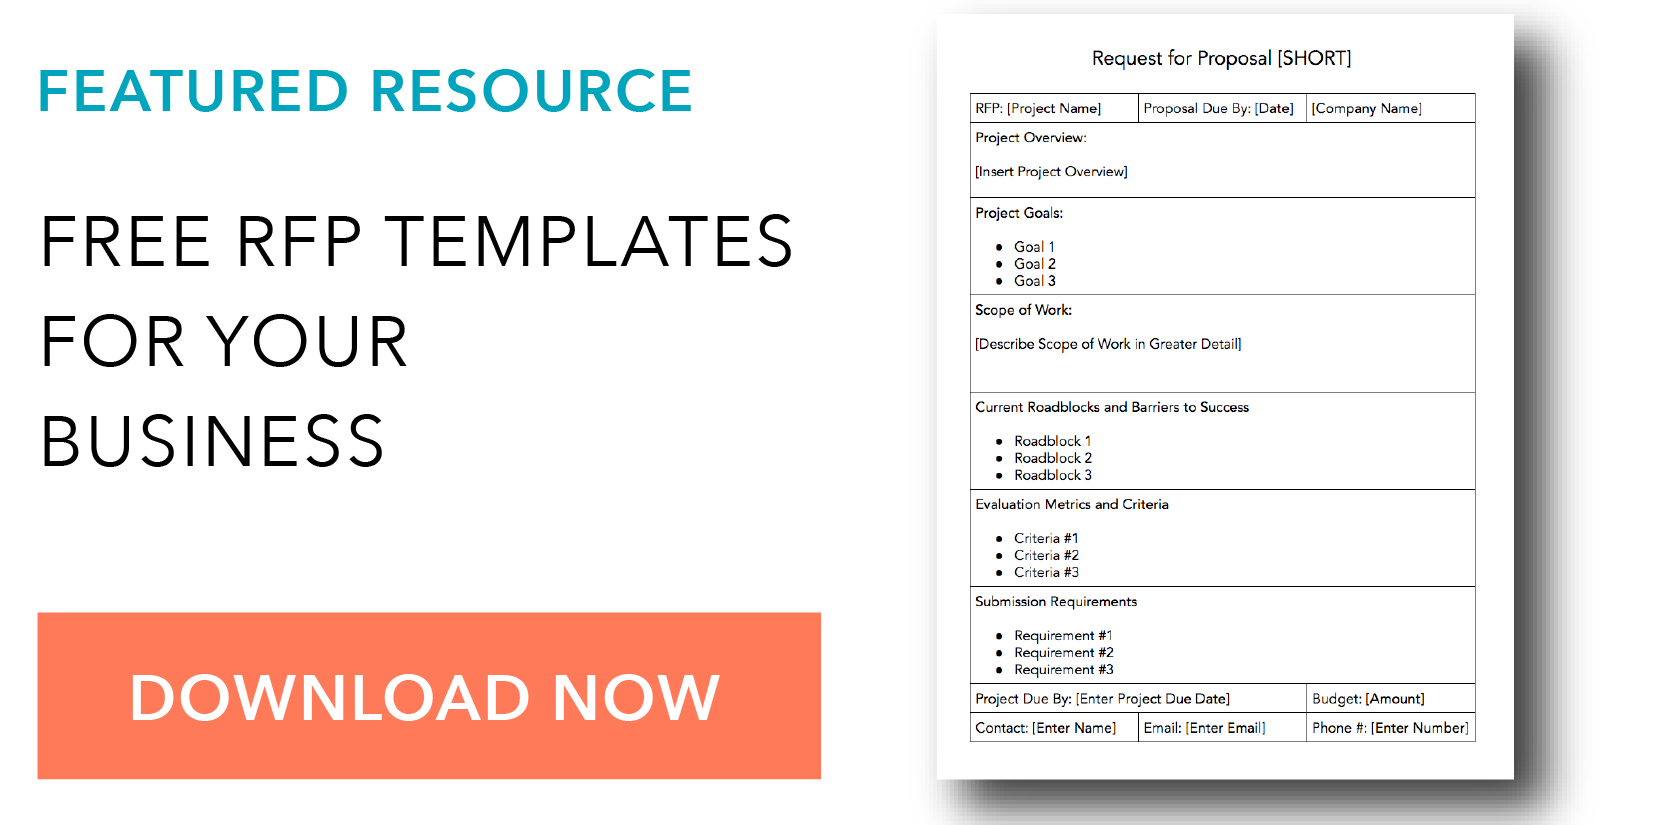 How to Write a Request for Proposal with Template and Sample Throughout Simple Request For Proposal Template